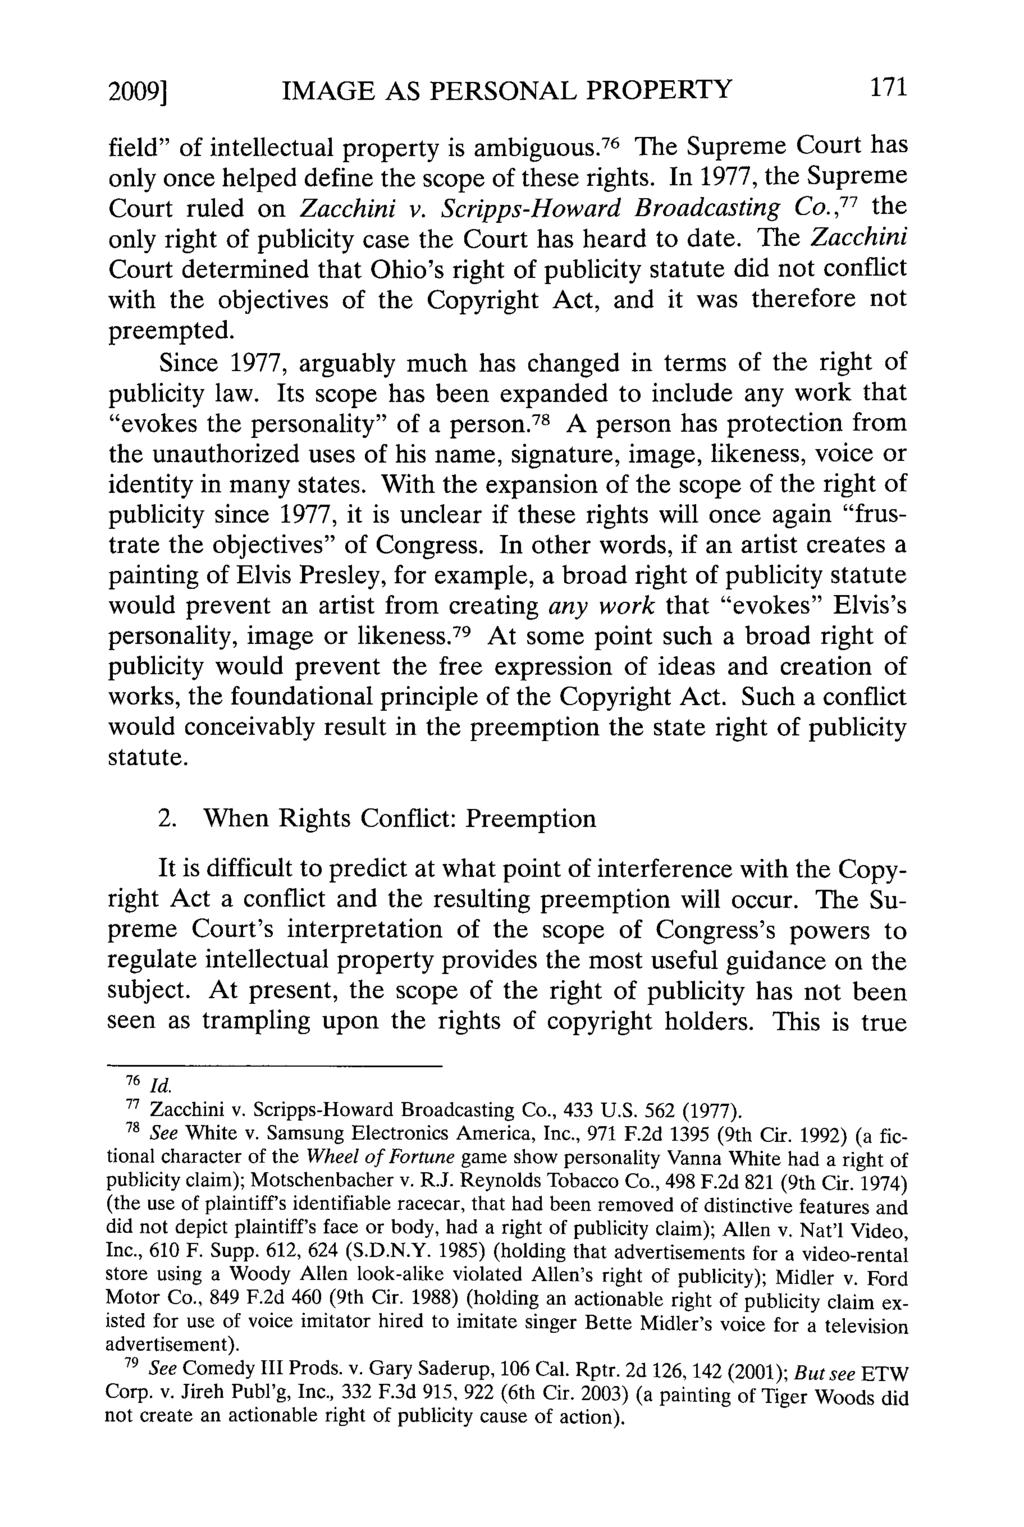 2009] IMAGE AS PERSONAL PROPERTY field" of intellectual property is ambiguous. 76 The Supreme Court has only once helped define the scope of these rights.